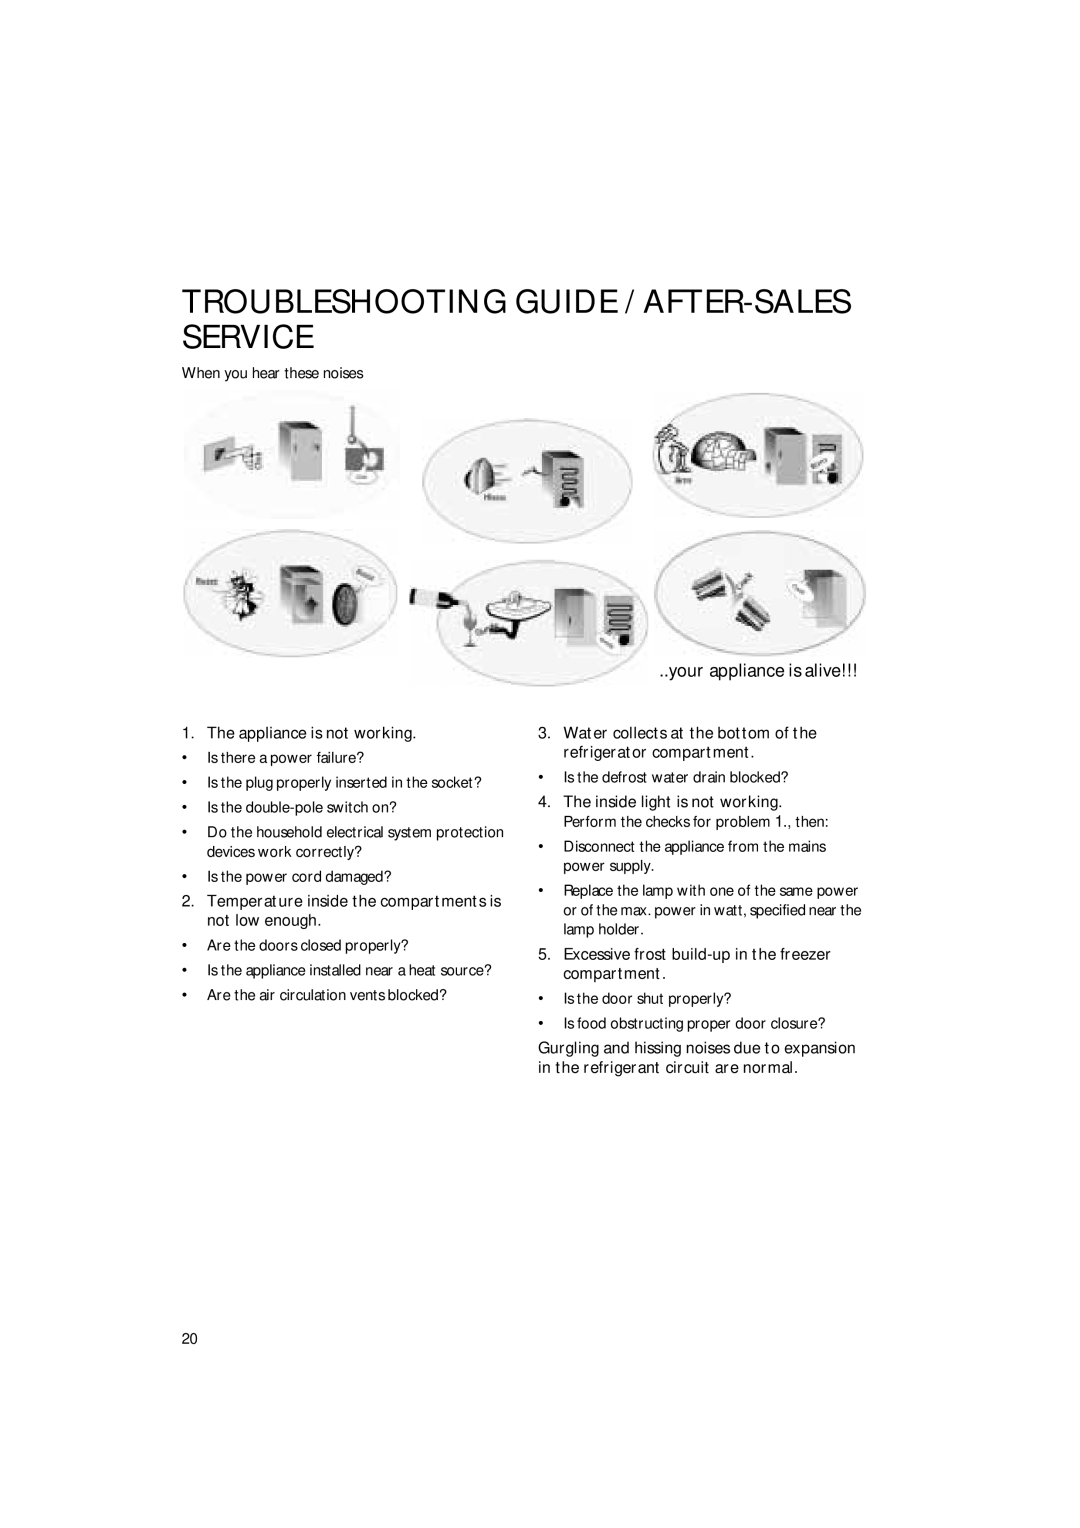 Smeg FR310APL manual Troubleshooting Guide / After-Sales Service, your appliance is alive, The appliance is not working 